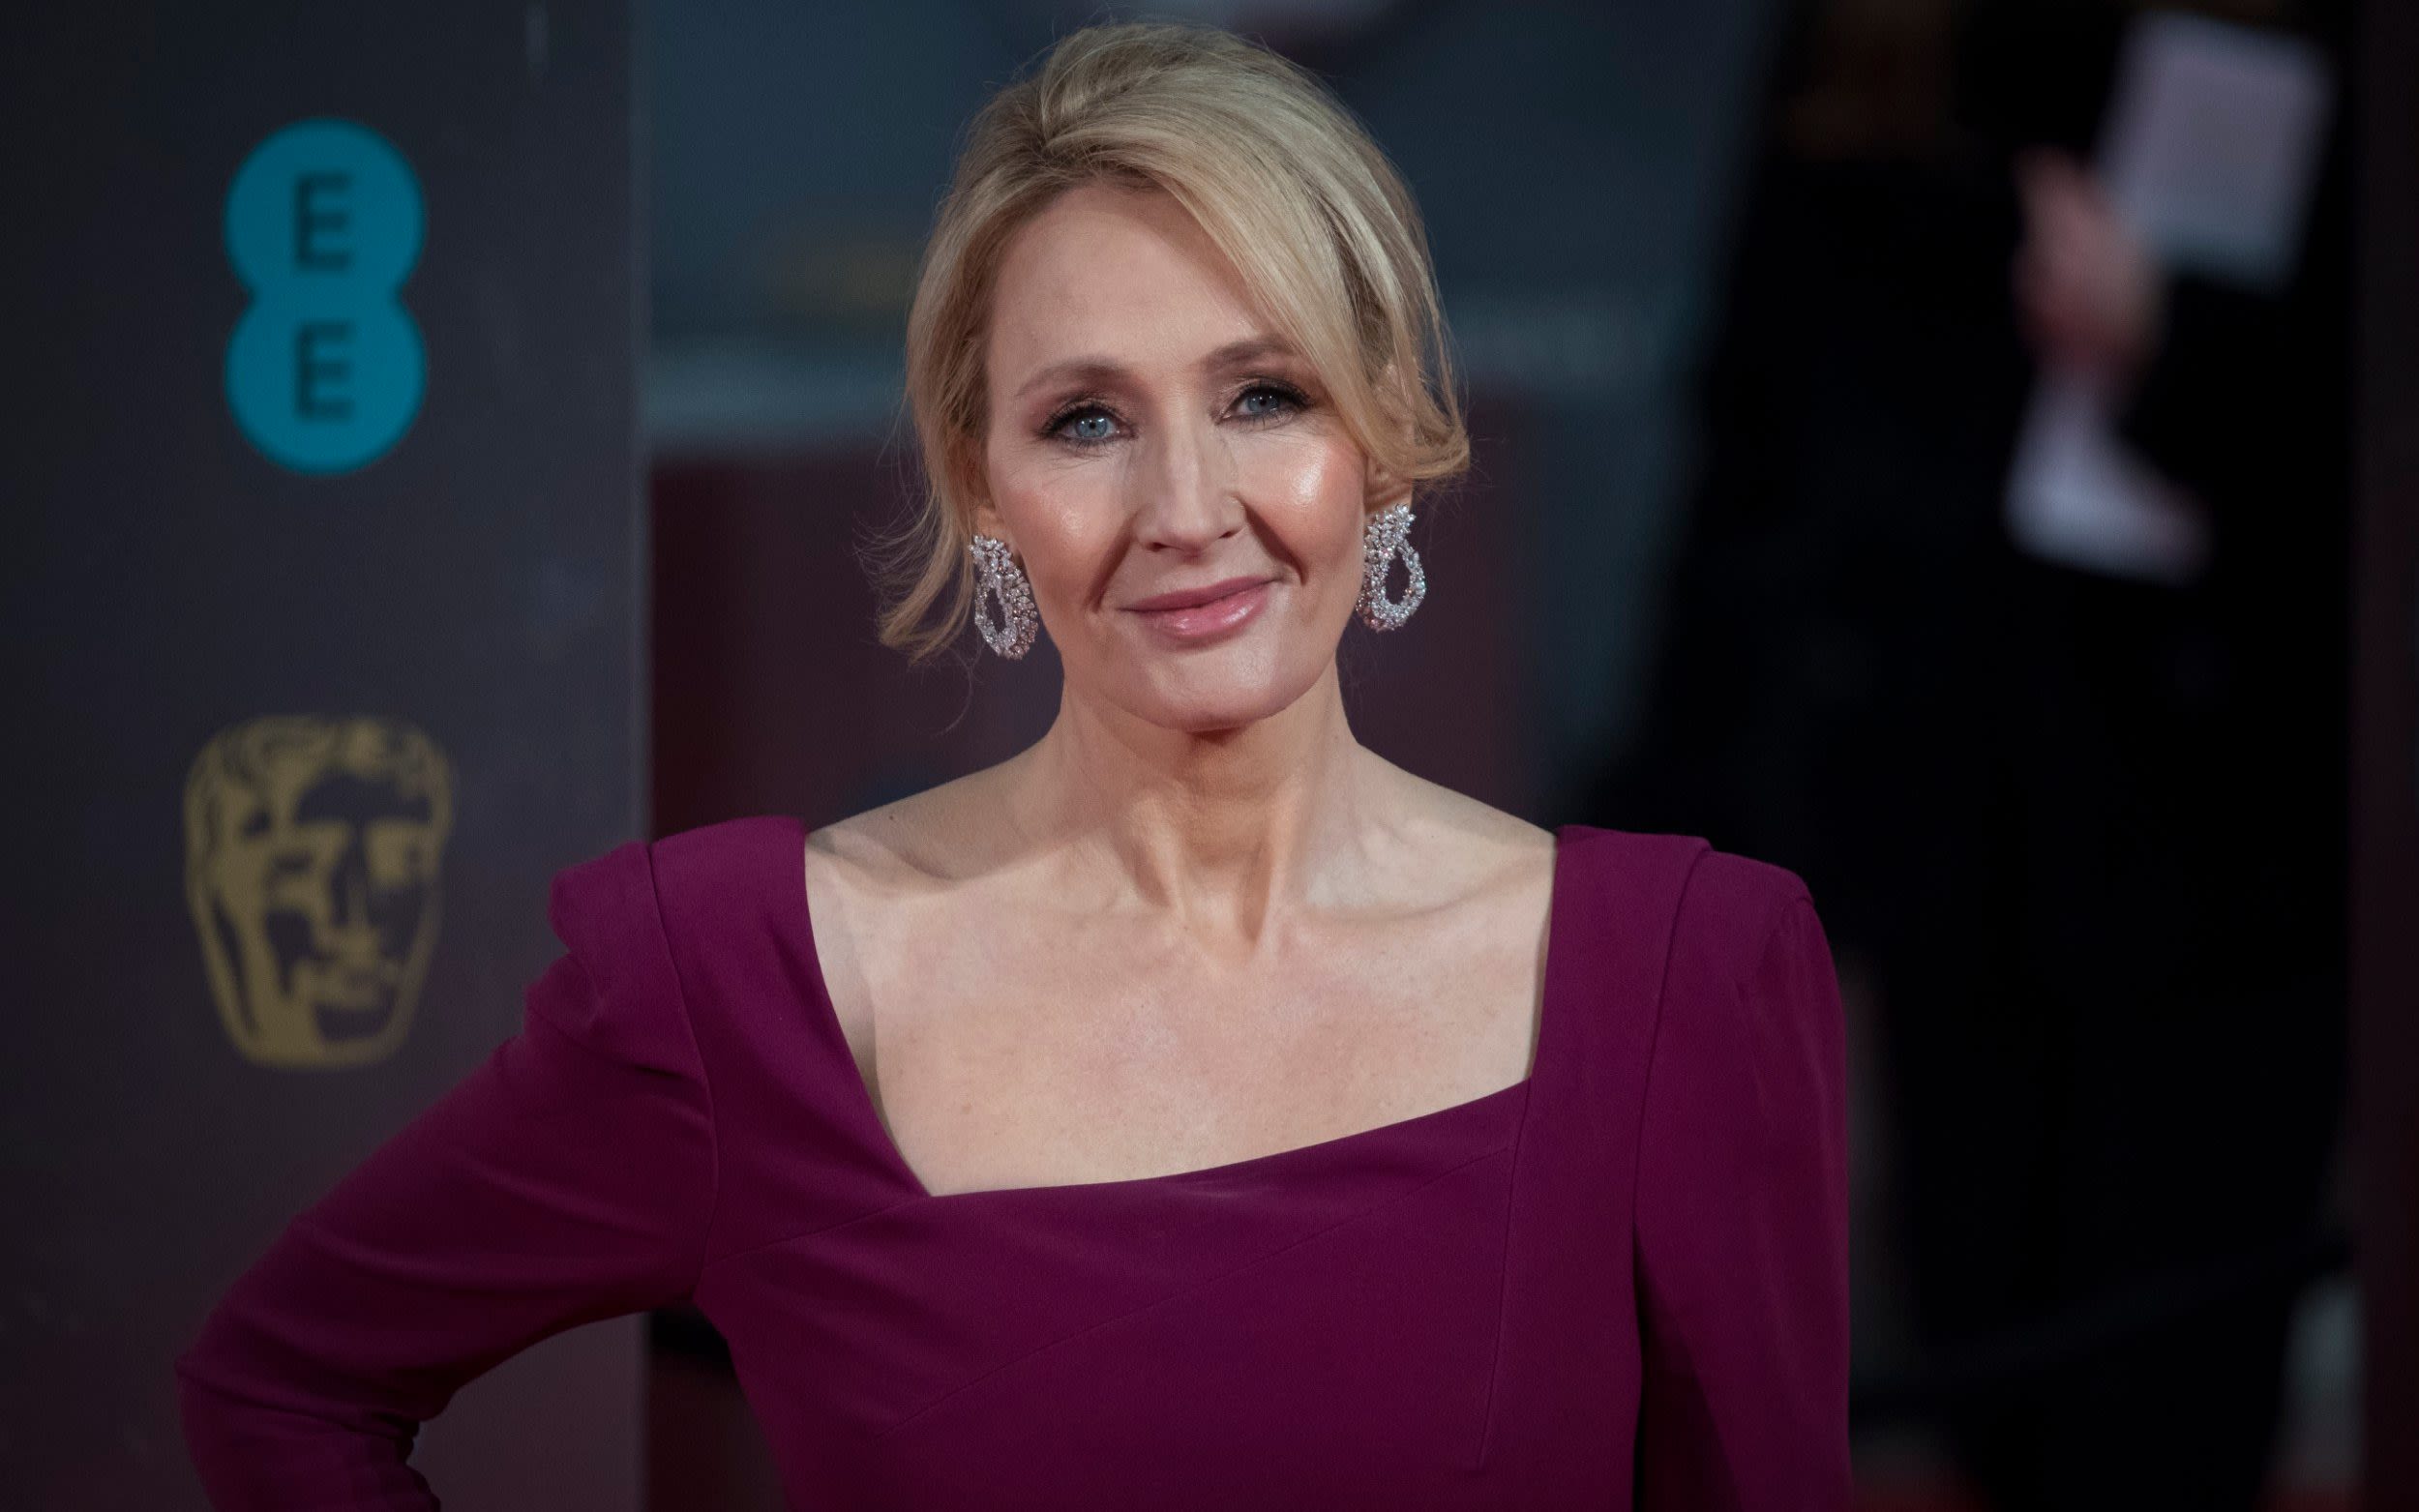 JK Rowling contributes to new feminist book on struggle against SNP’s trans agenda